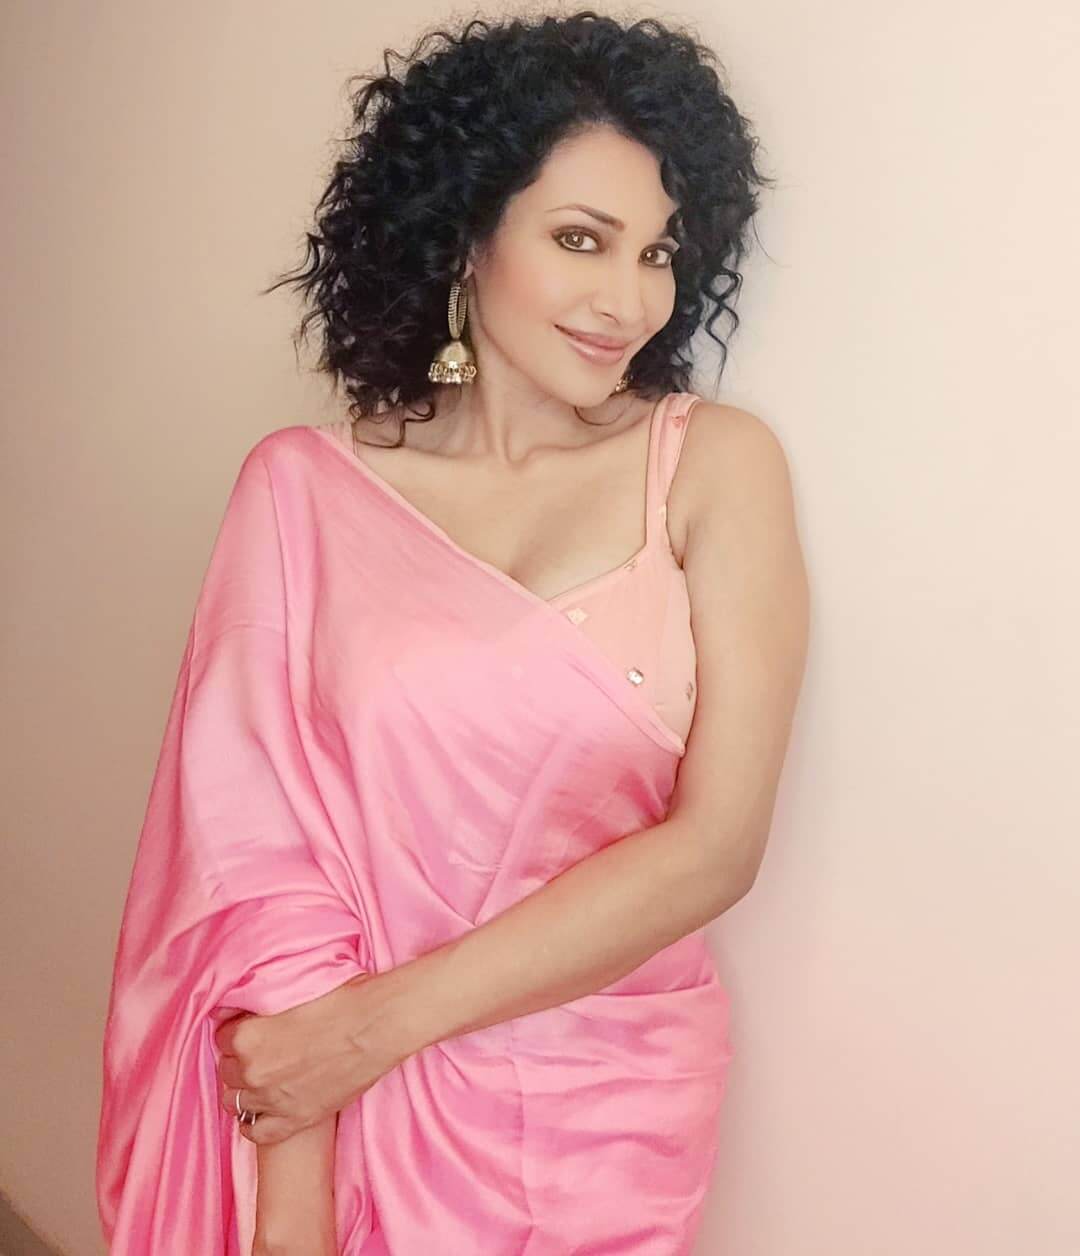 Flora Saini Look Gorgeous In Pink Solid Saree With Sleeveless Blouse